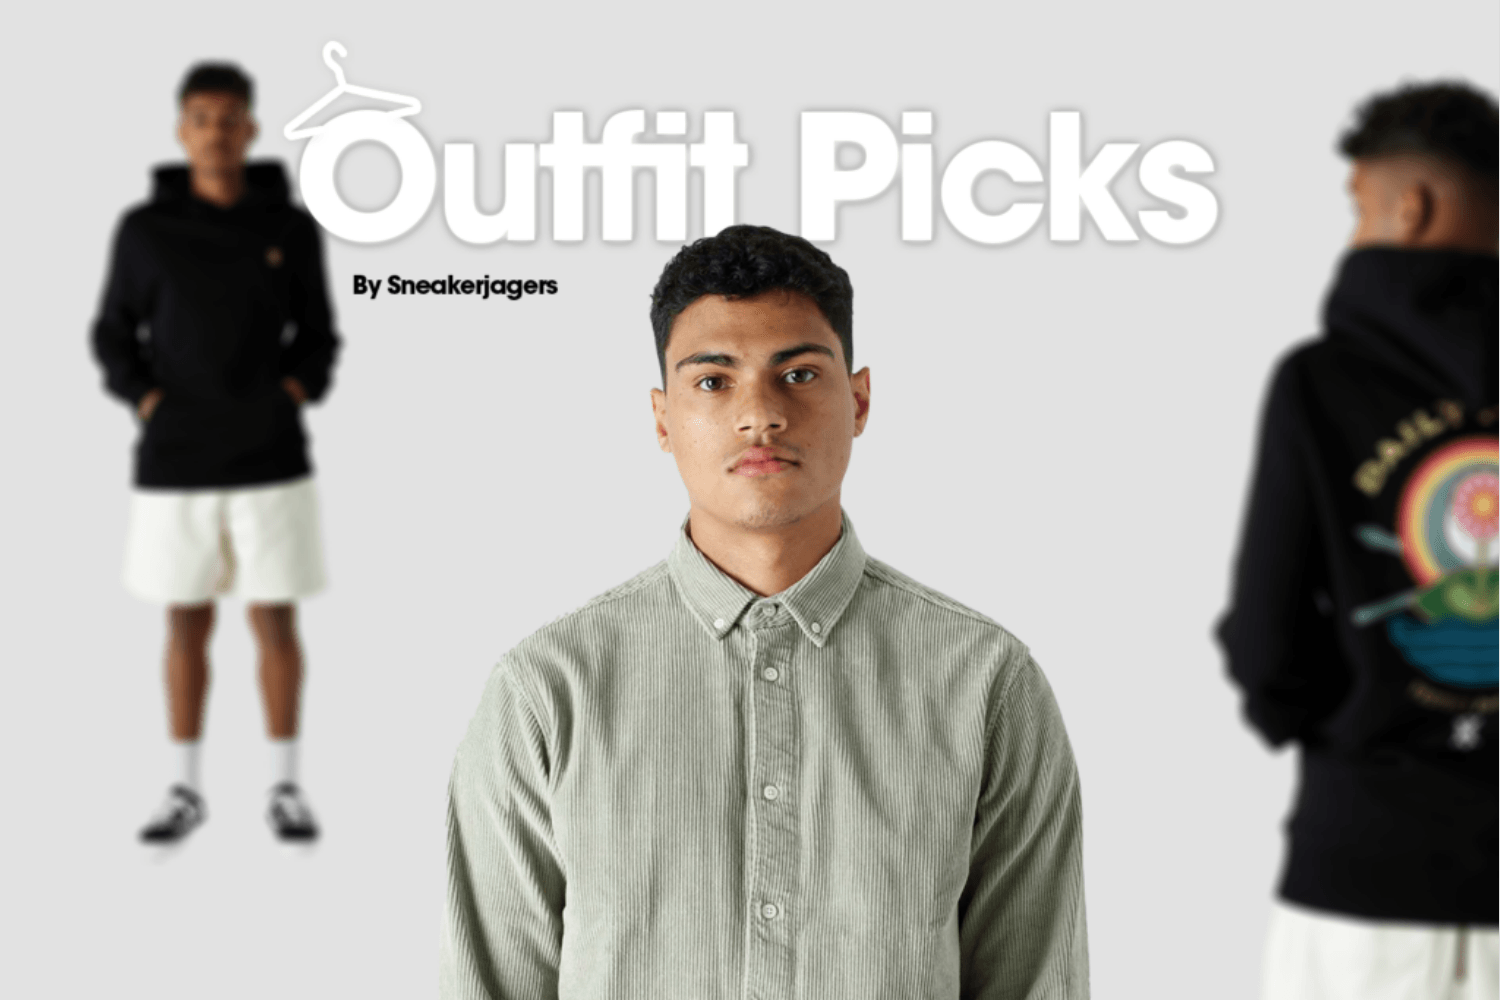 Outfit Picks by Sneakerjagers - Woche 16